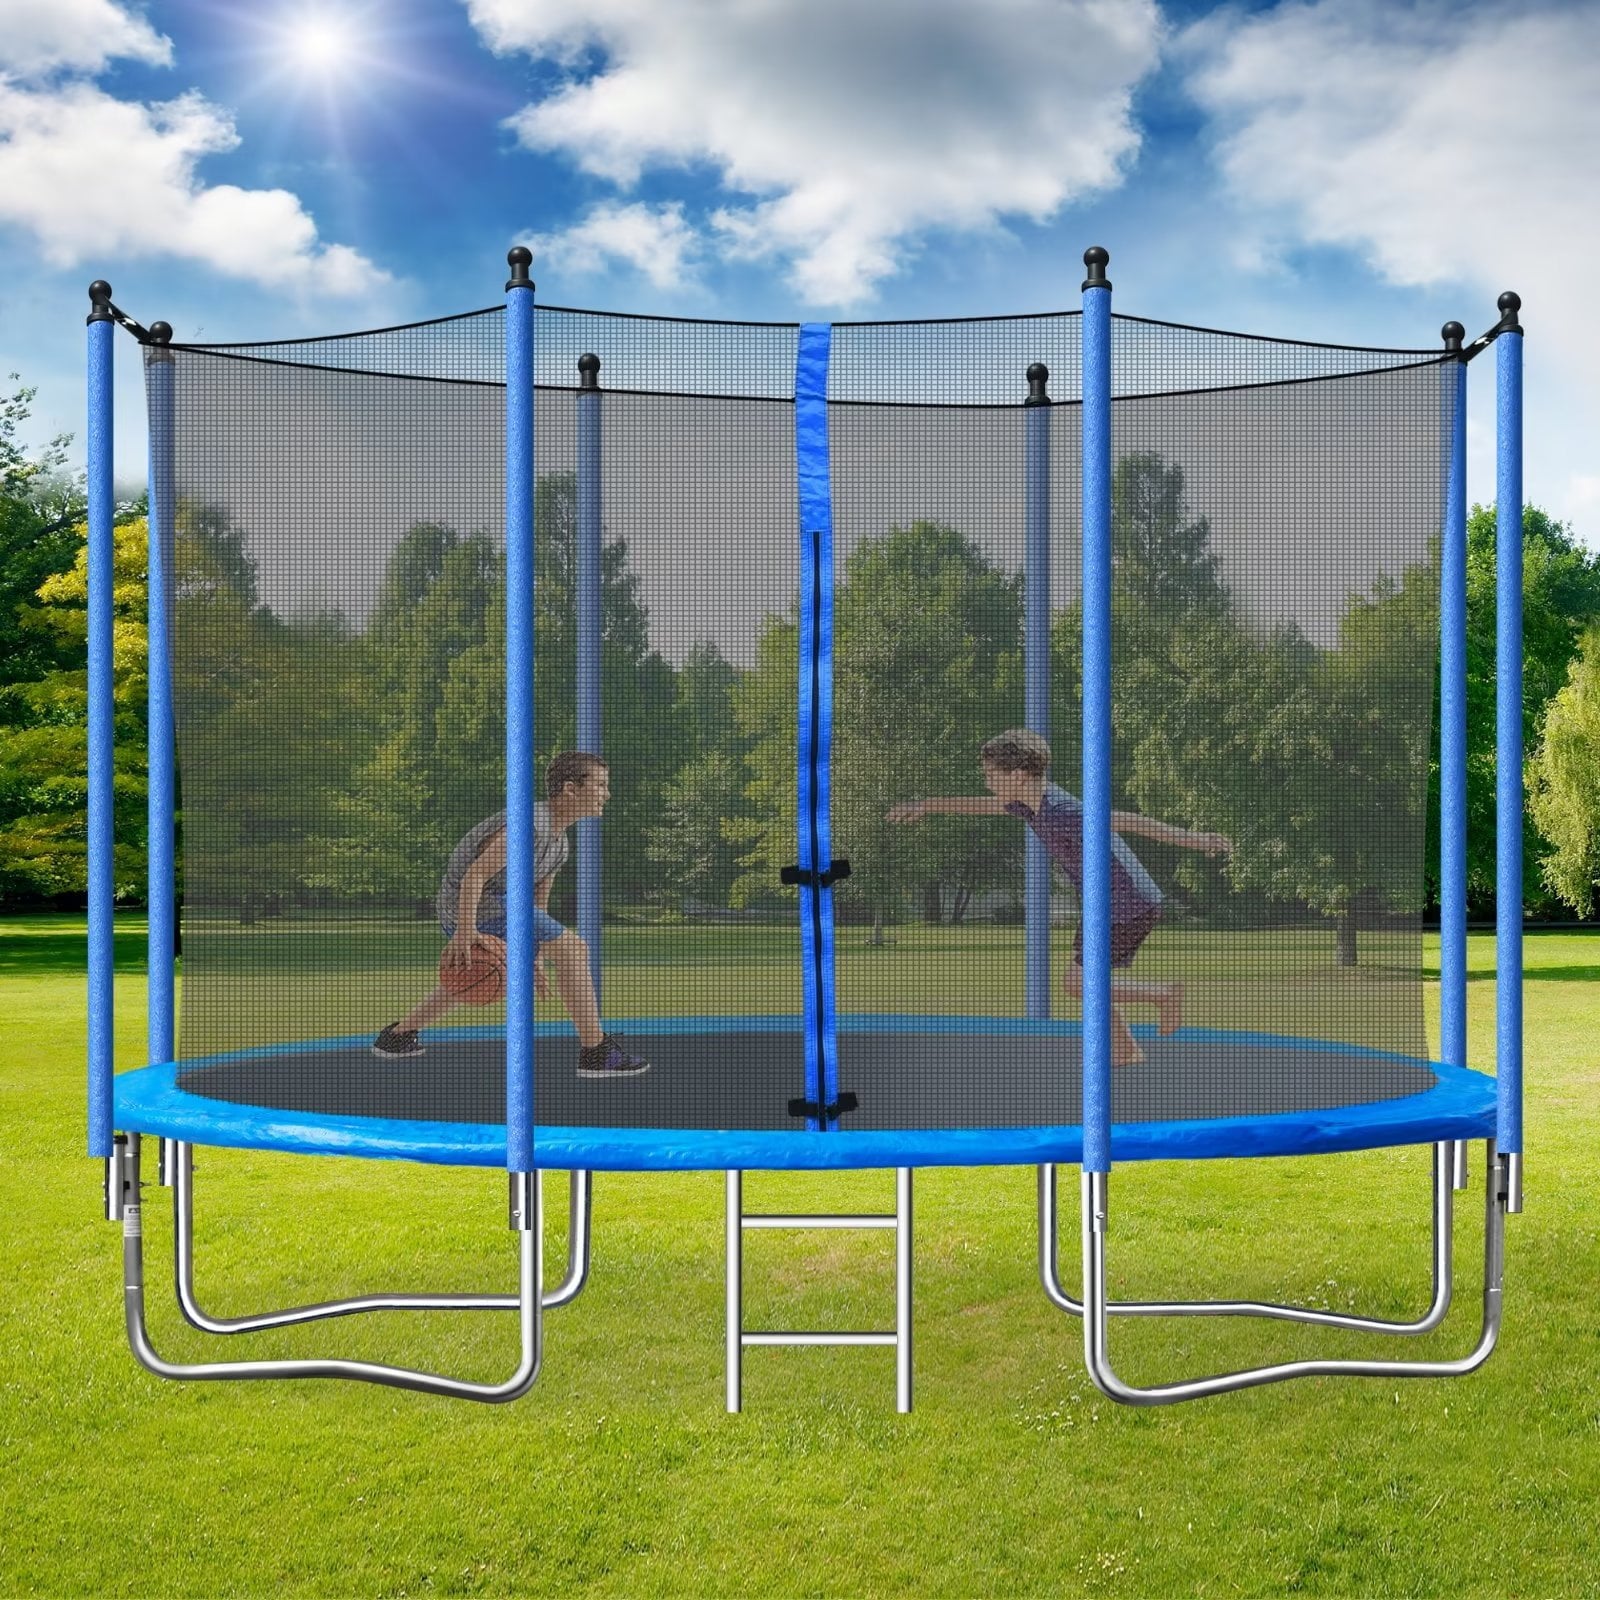 10ft Round Trampoline for Kids with Safety Enclosure Net , Outdoor Recreational Trampoline with Metal Ladder and Steel Tube, ASTM Approved Trampoline & High Stability